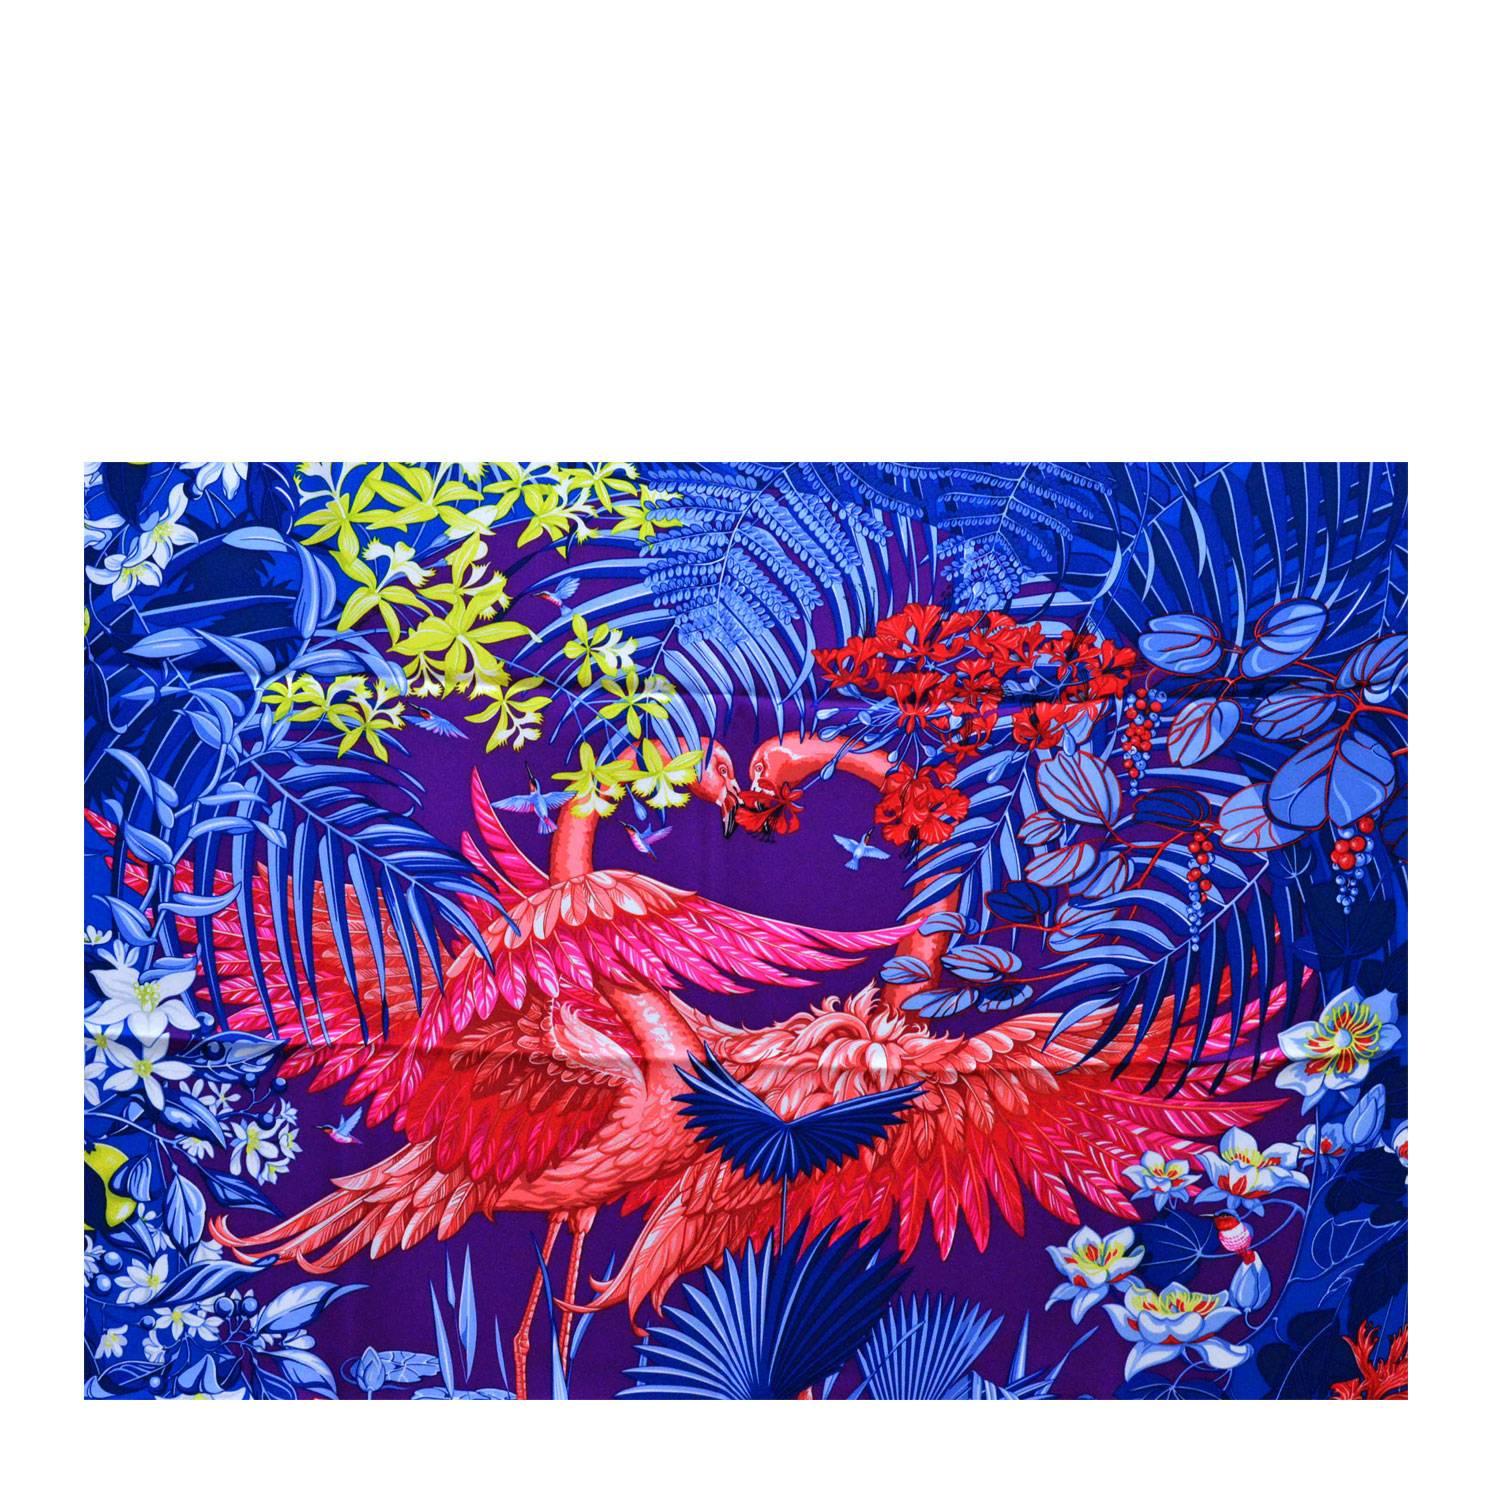 Hermes Carre Twill 100% Soie FLAMINGO PARTY ROUGE-VIOLET

Bought it in hermès store in 2015.

Size: 90X90 Cm.

Model: FLAMINGO PARTY

Details:
*Protective felt removed for purposes of photography only.
-Original Invoice.
-Shipment and